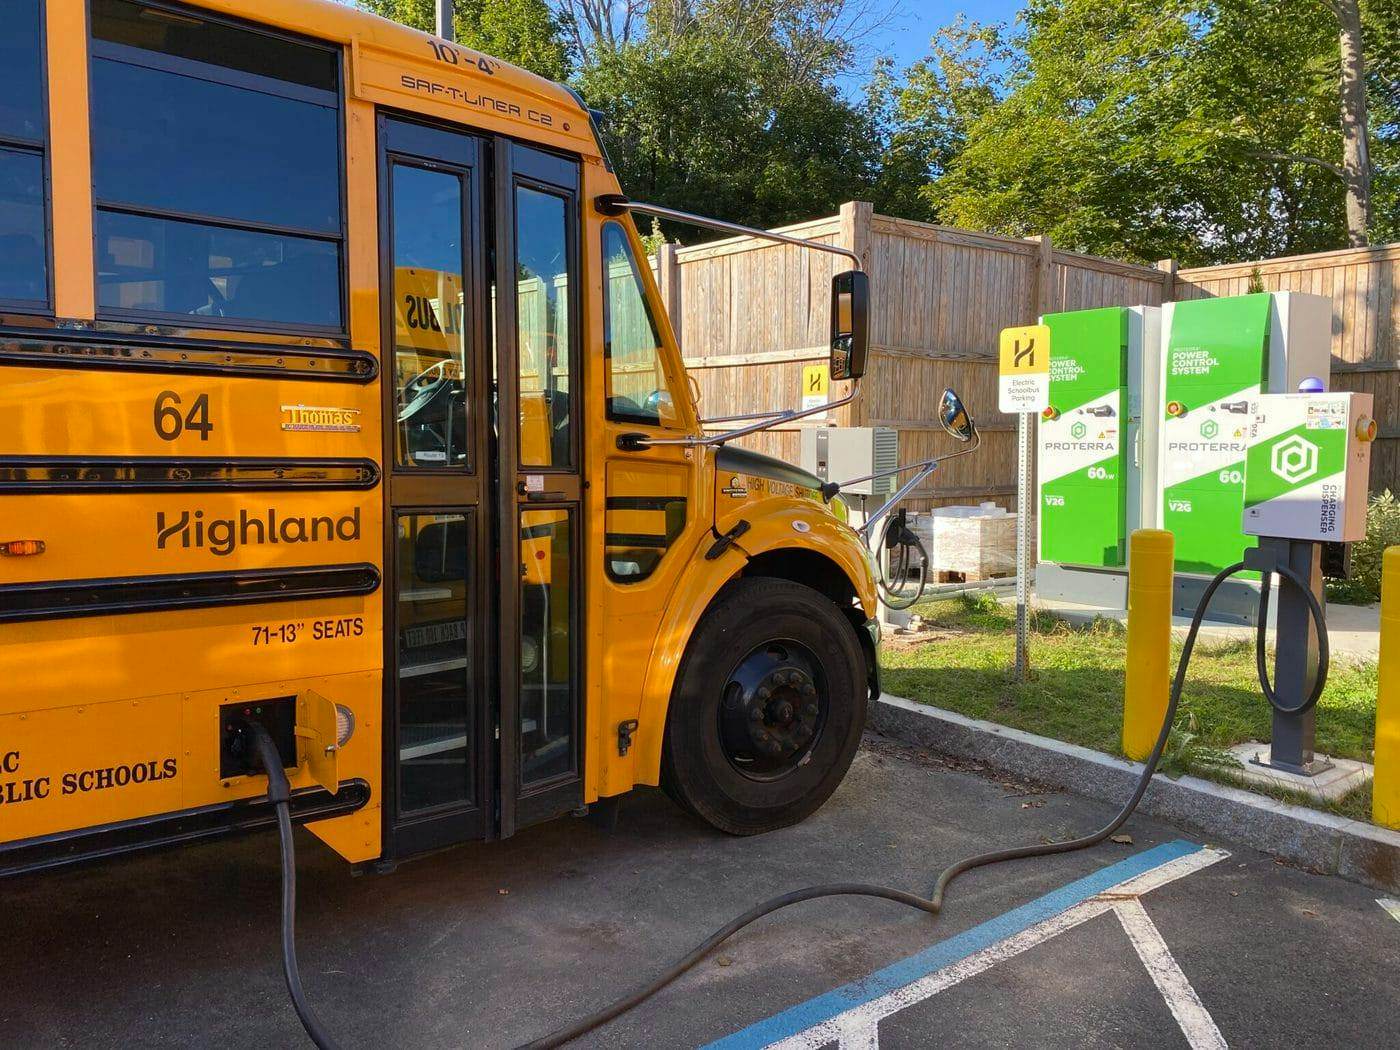 image of a school bus plugged in to give energy back to the grid